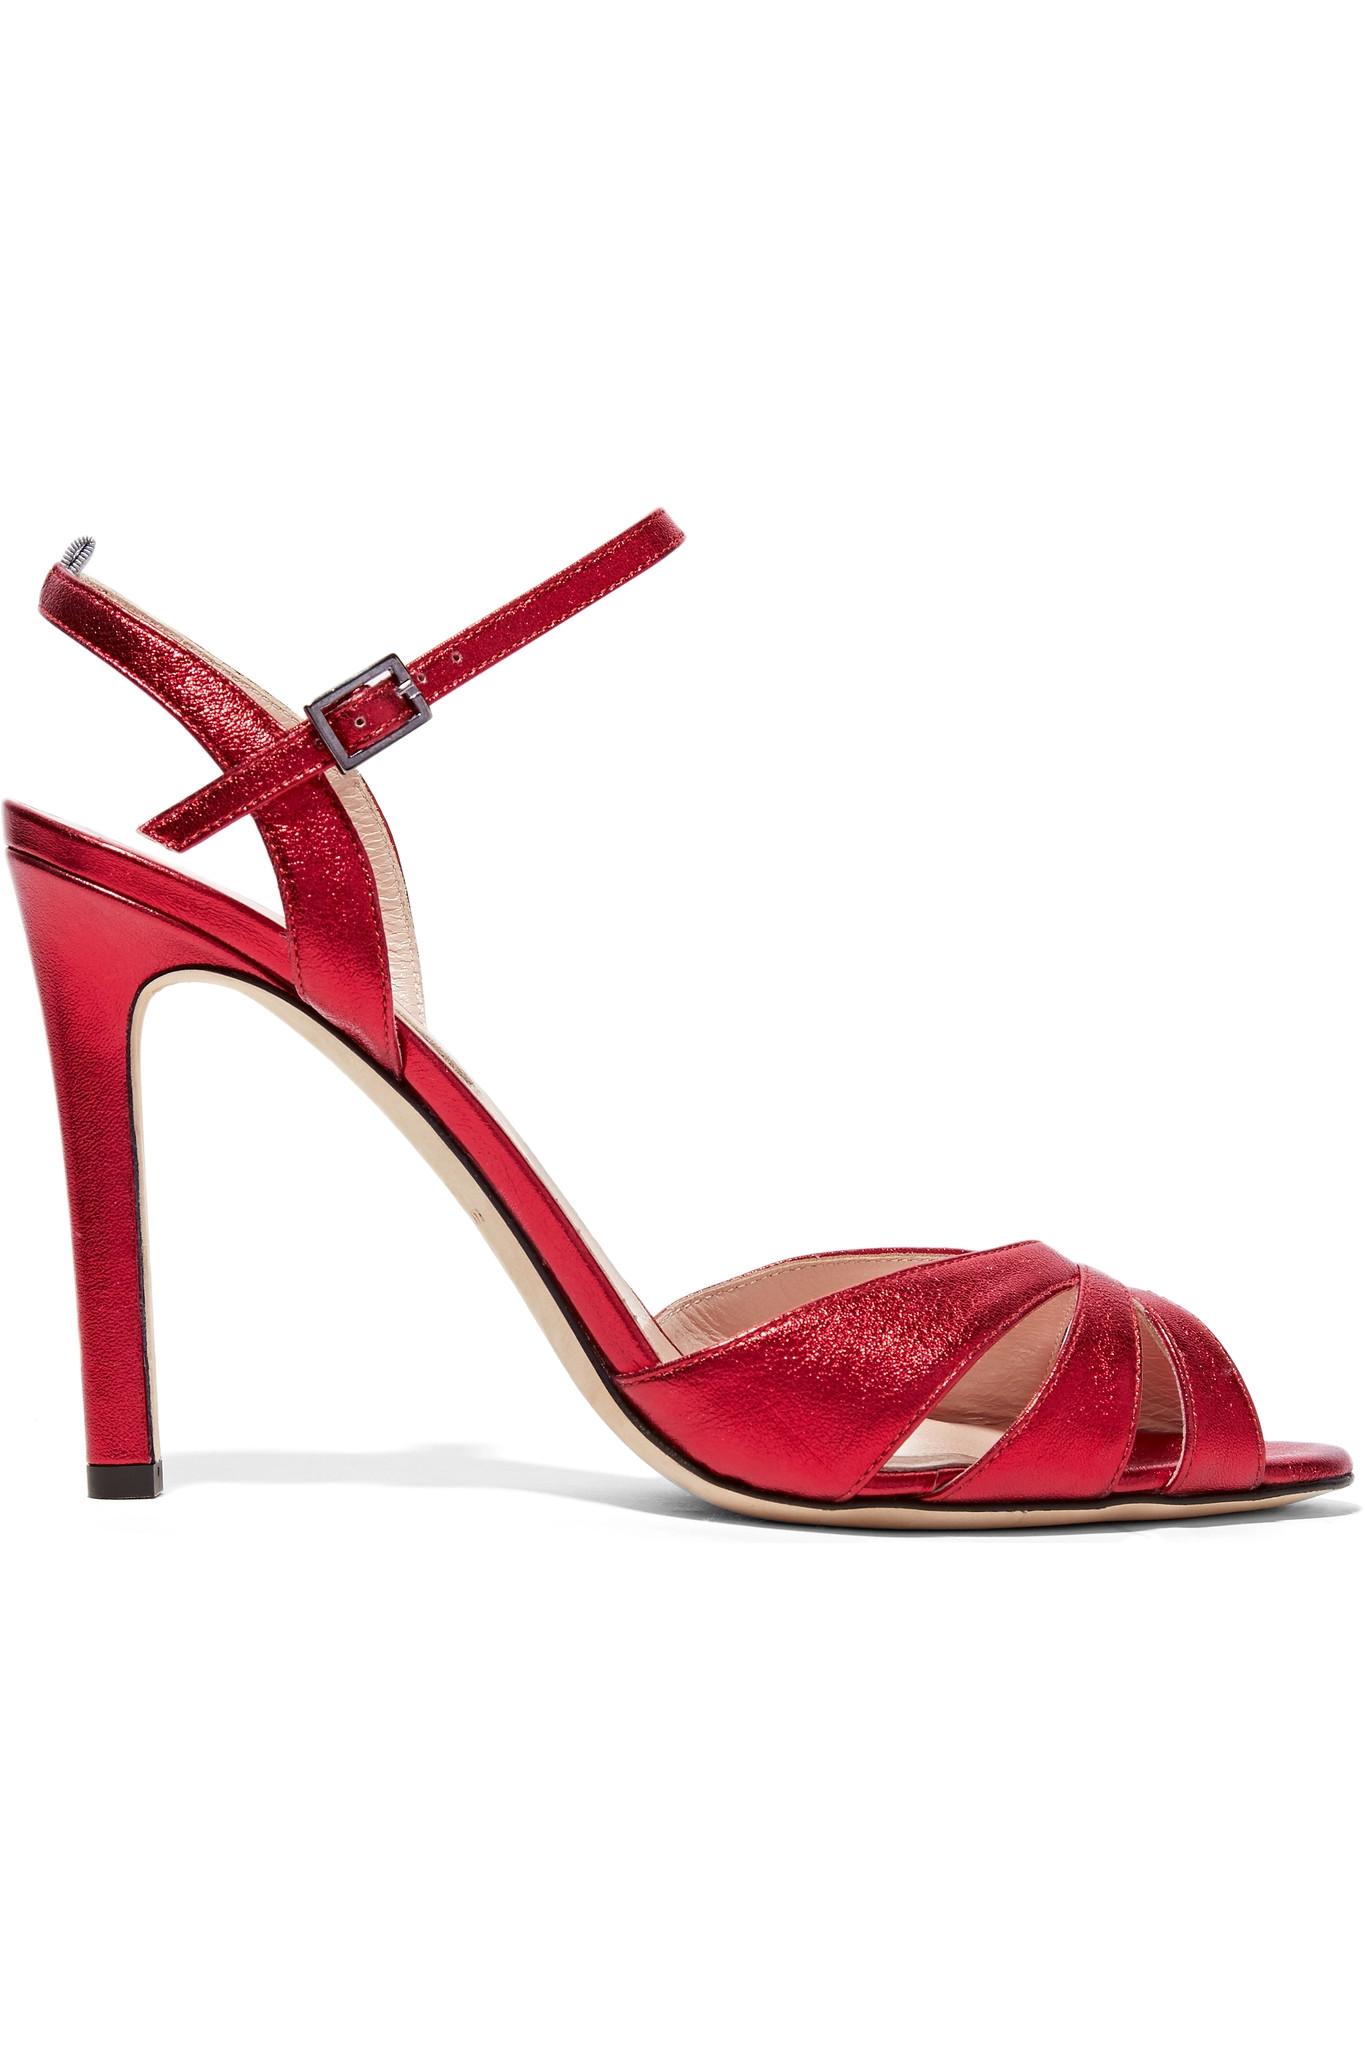 Sjp by sarah jessica parker Westminster Metallic Leather Sandals in Red ...